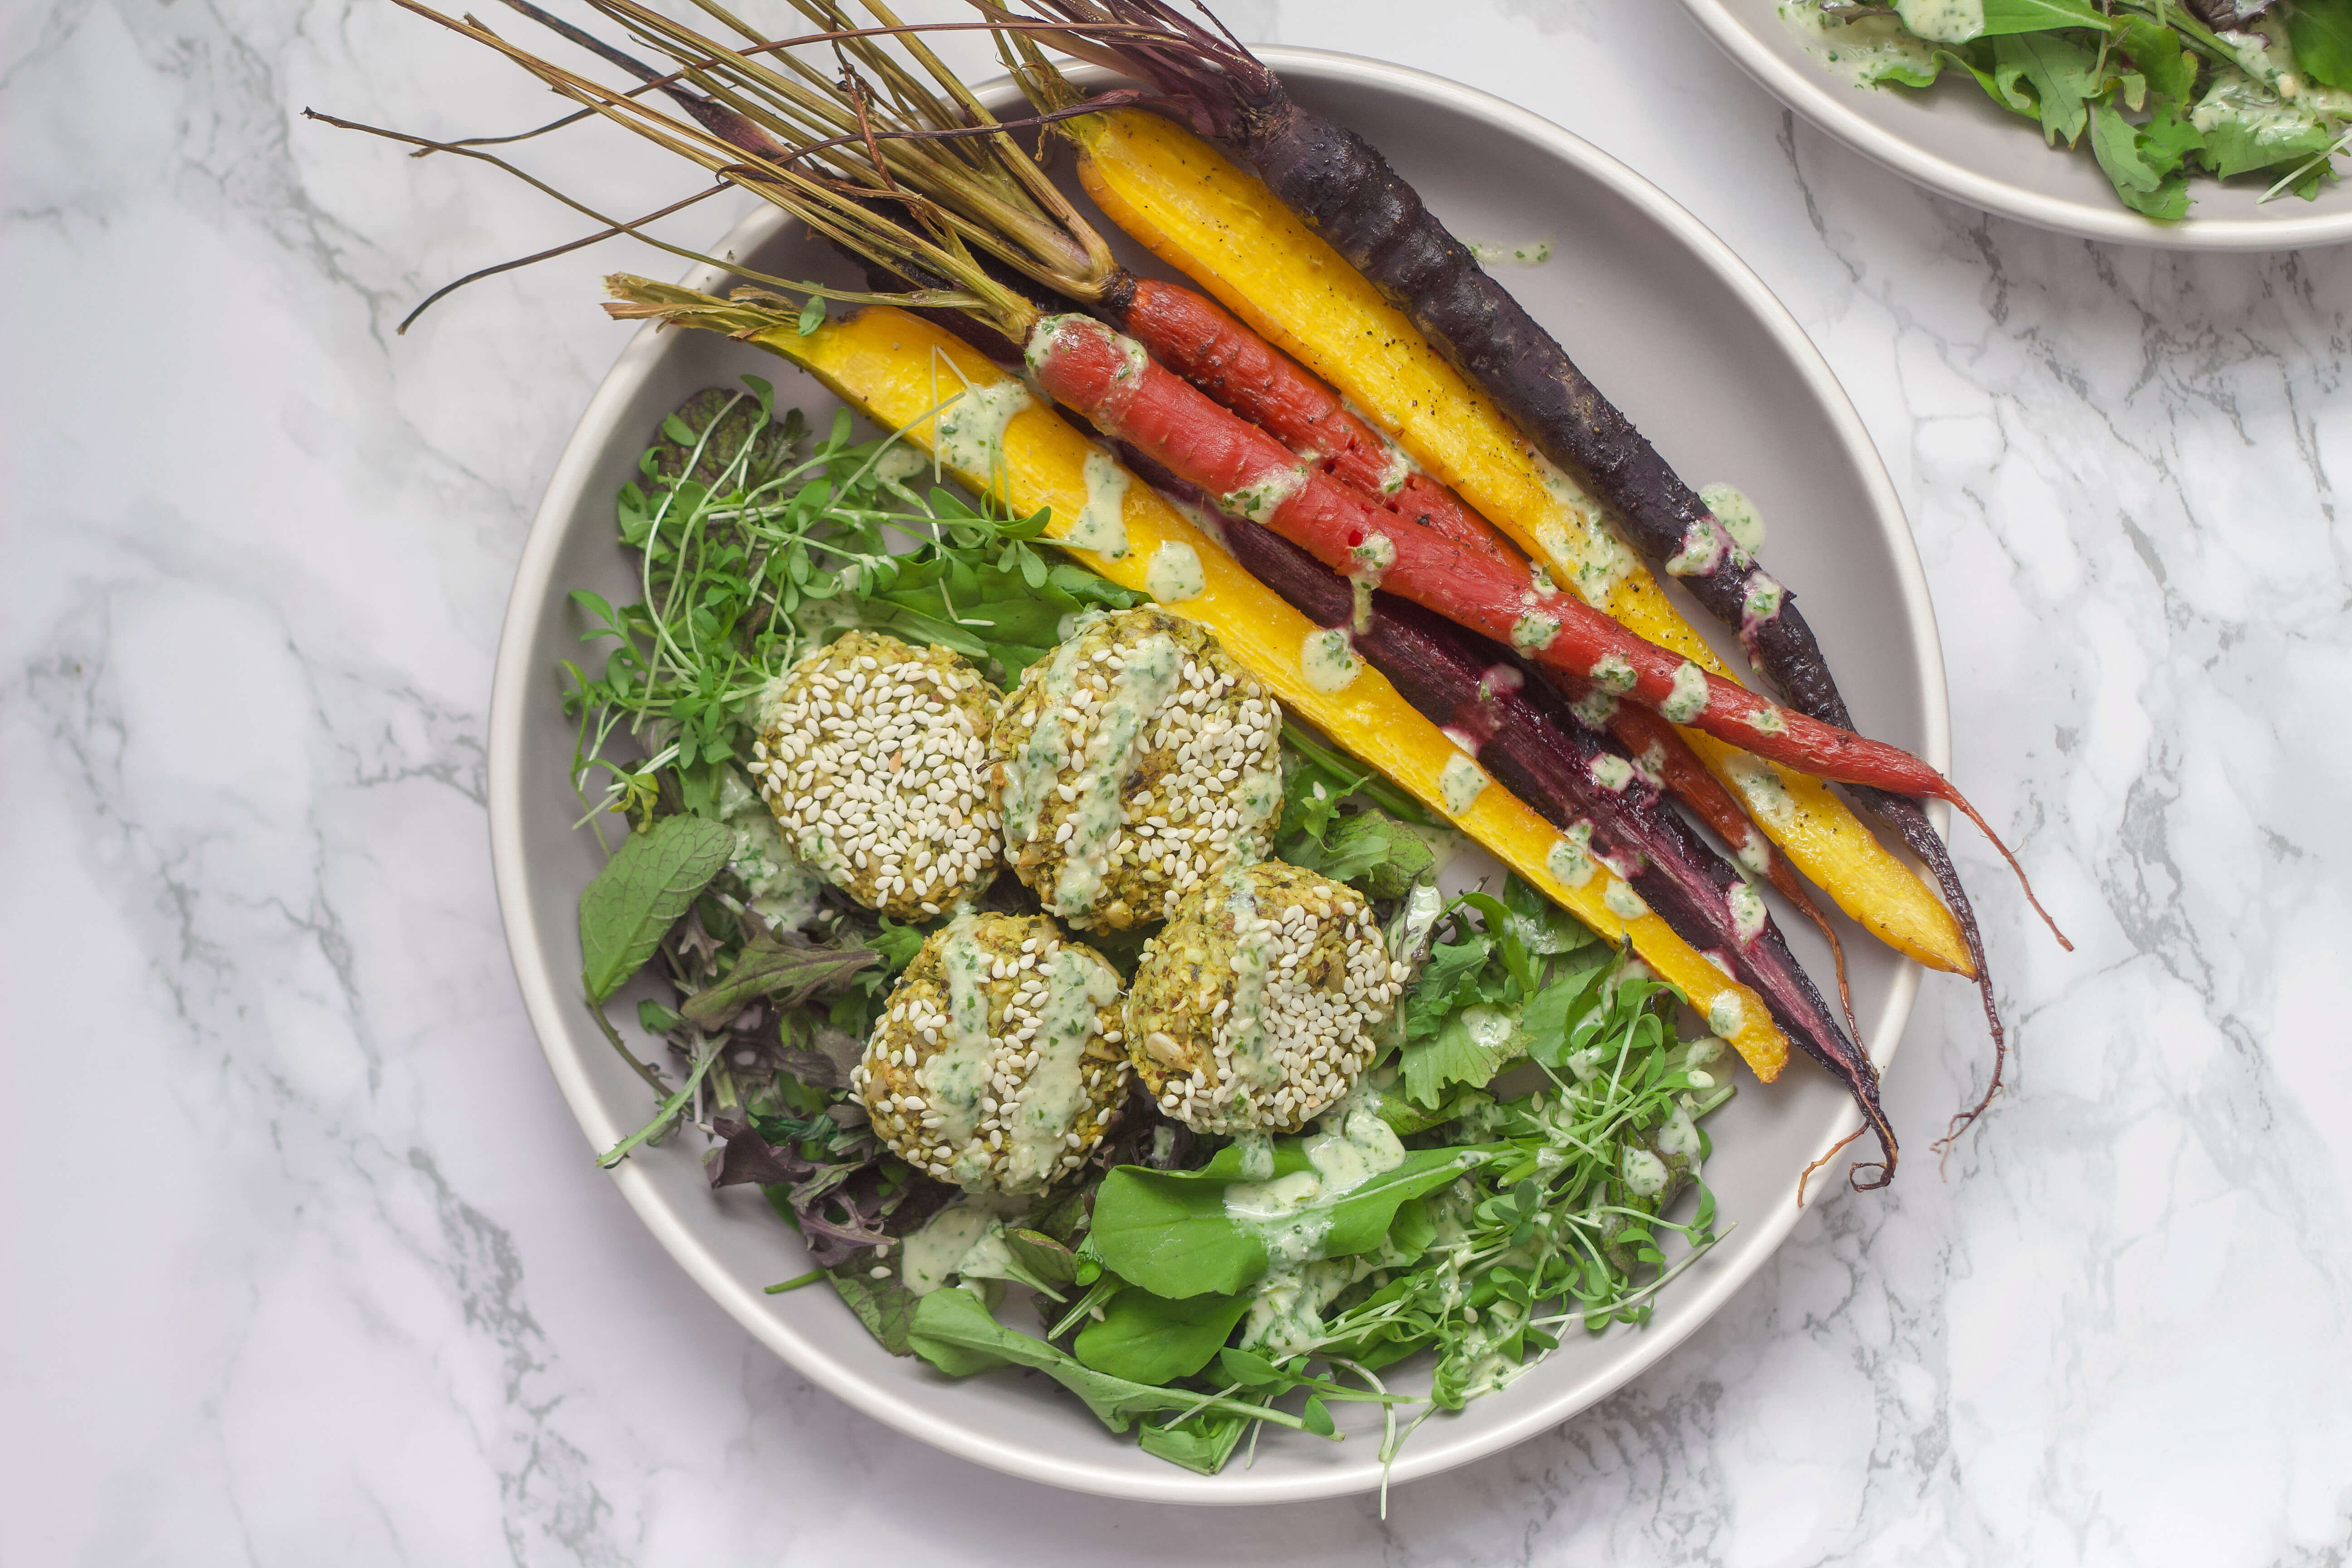 20 High Protein, Plant-Based Meals Your Clients Will Love: Paleo Falafel Salad with Mint Tahini Sauce